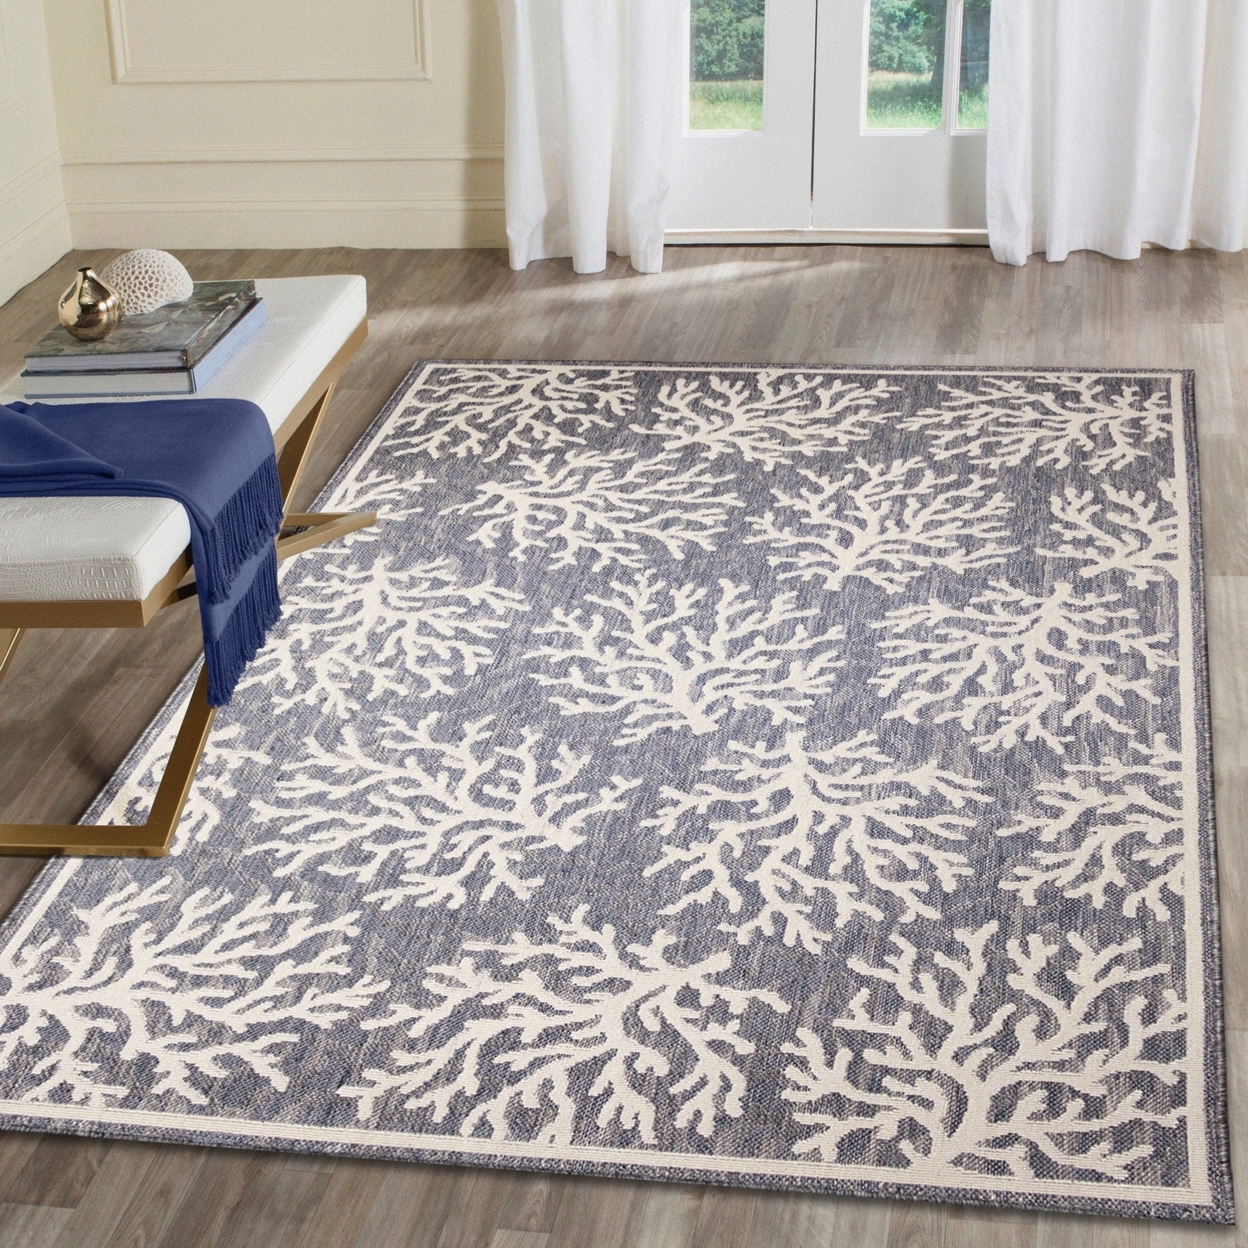 Liora Manne Cove Coral Indoor Outdoor Area Rug Blue - 6'6 X 9'3